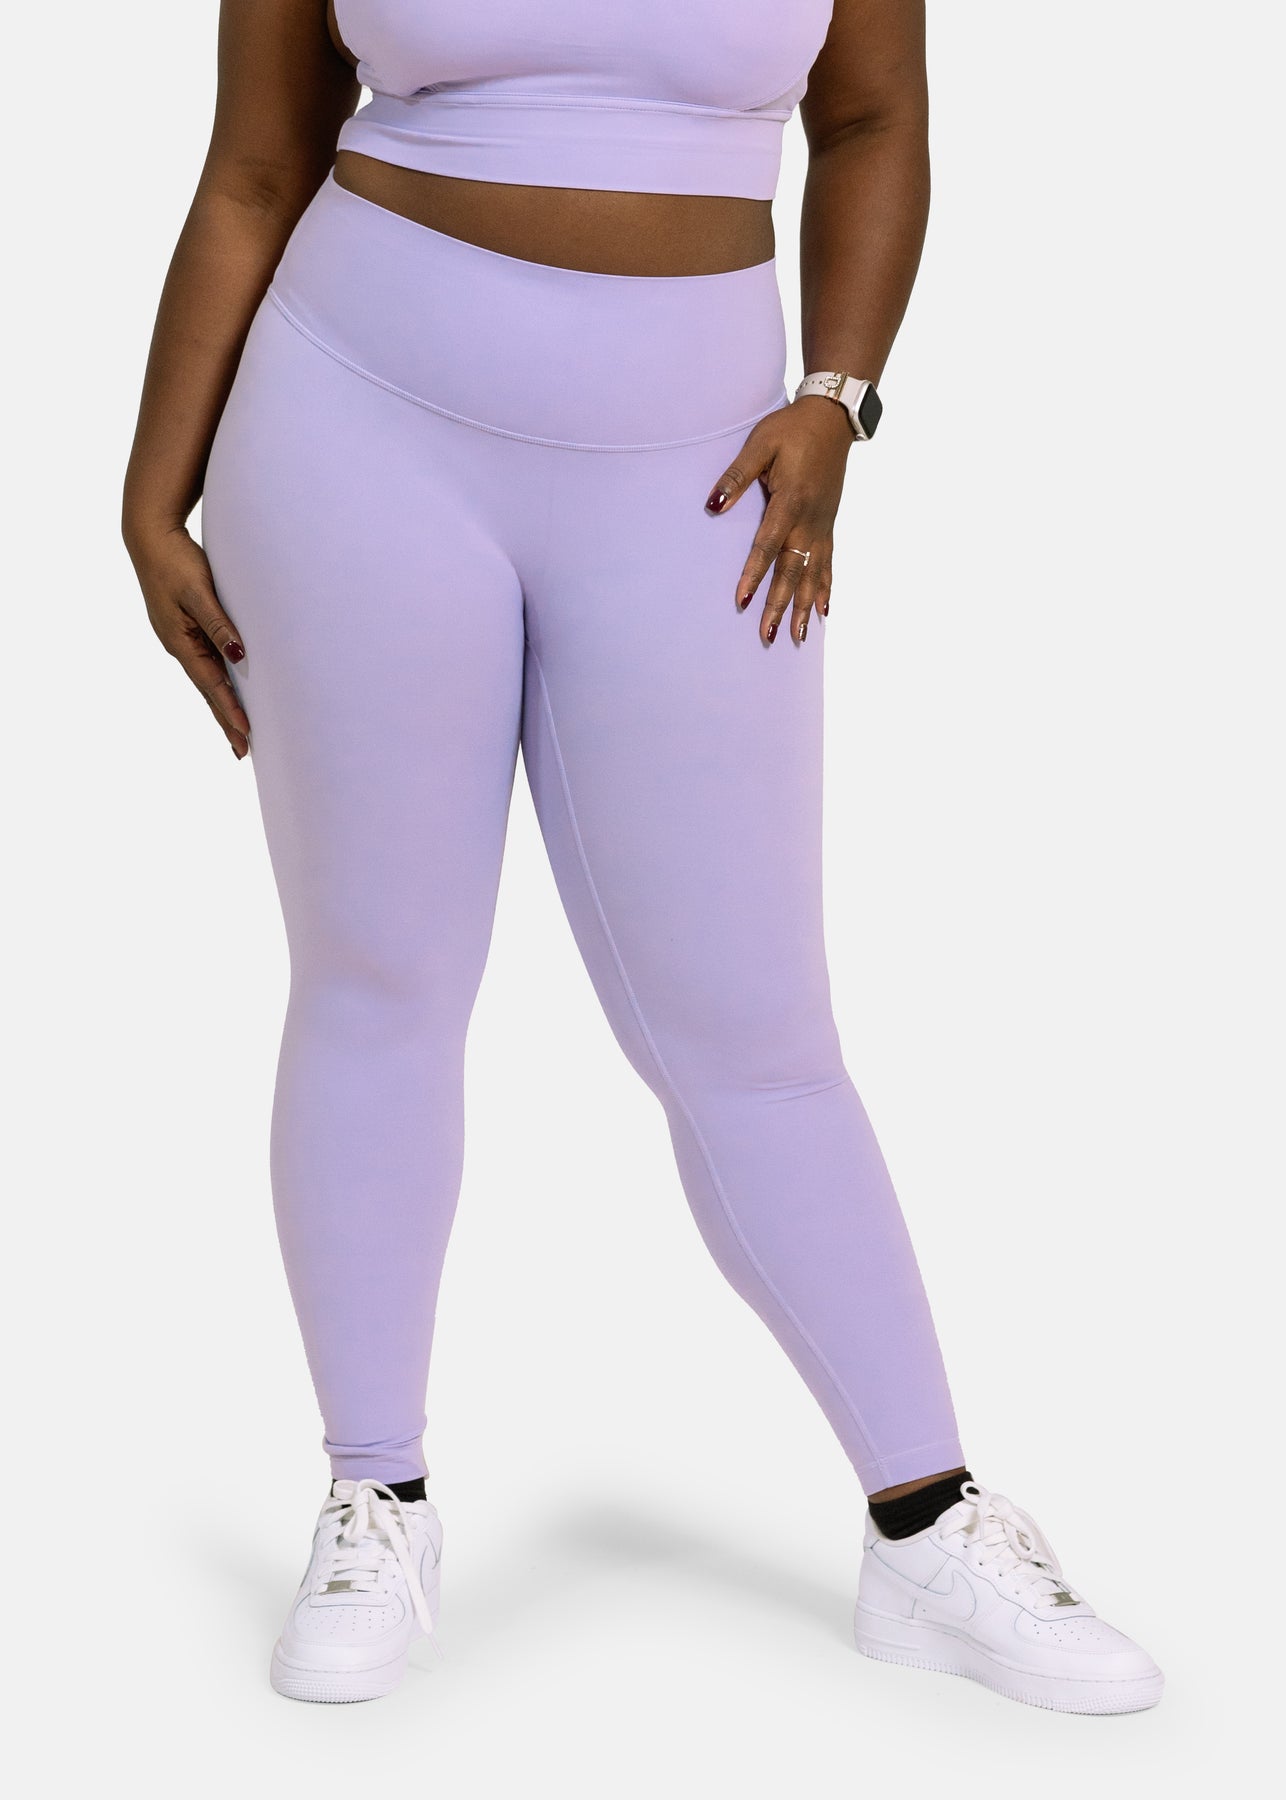 Energy Leggings with Geometric Silver Lines Print in Lavender